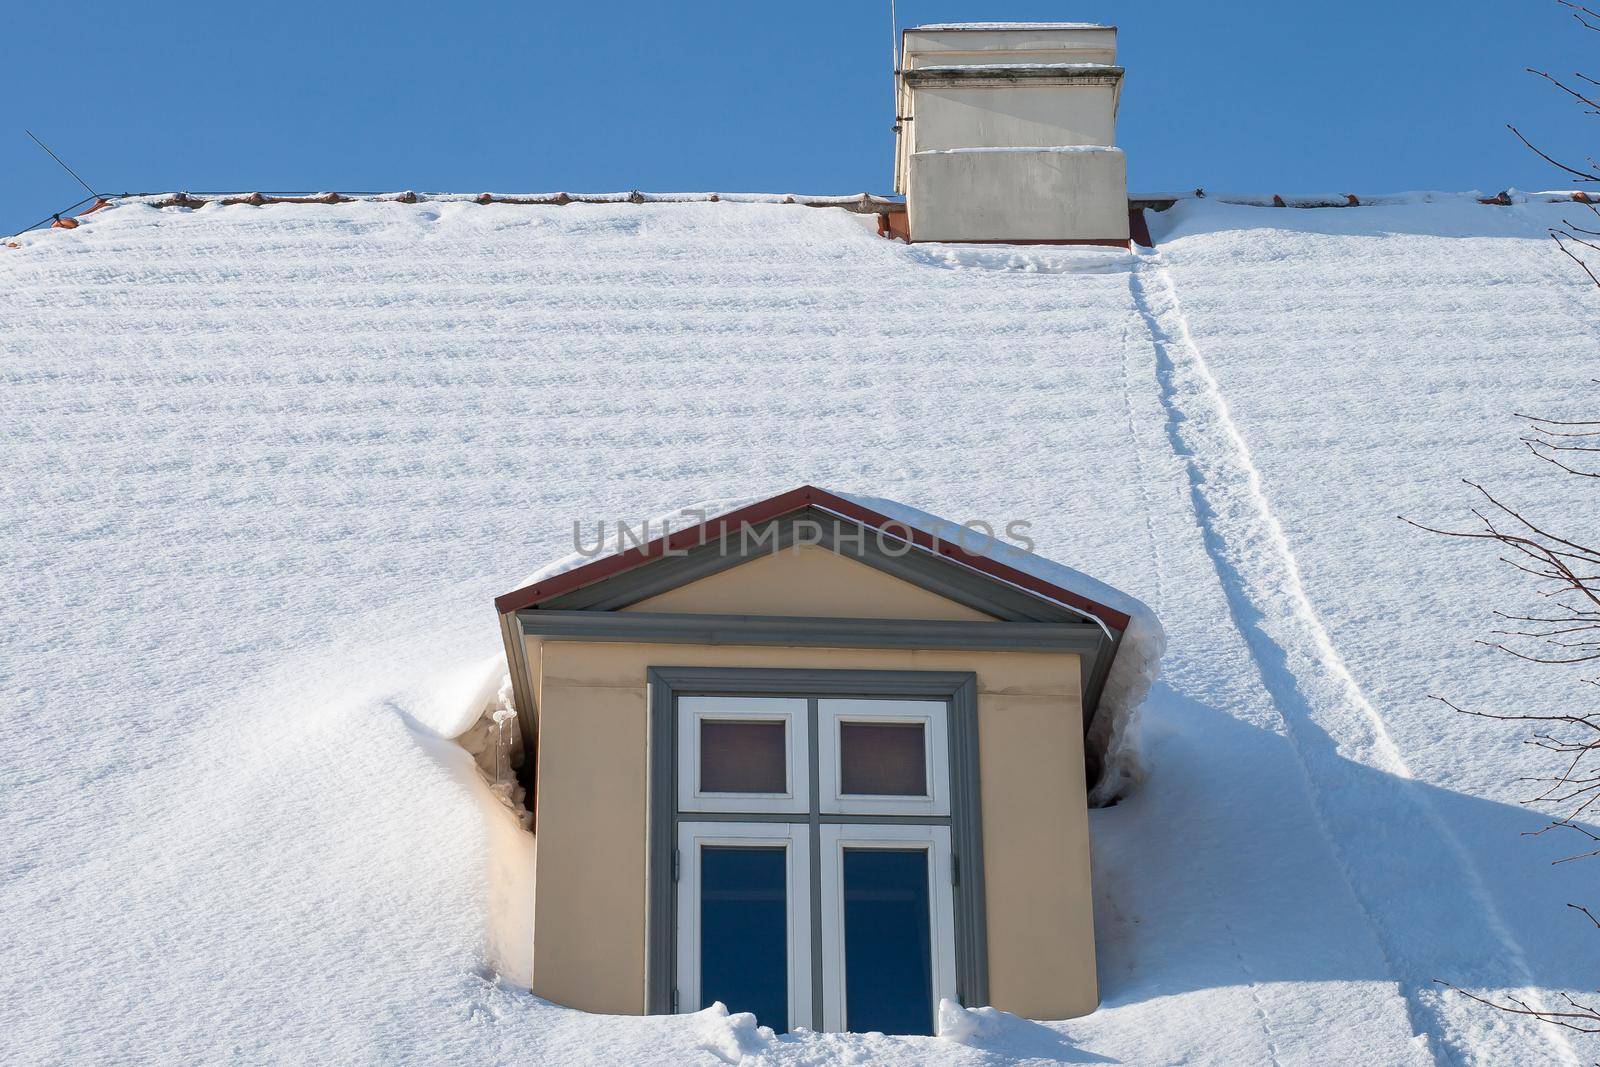 snow-covered house roof and window on it